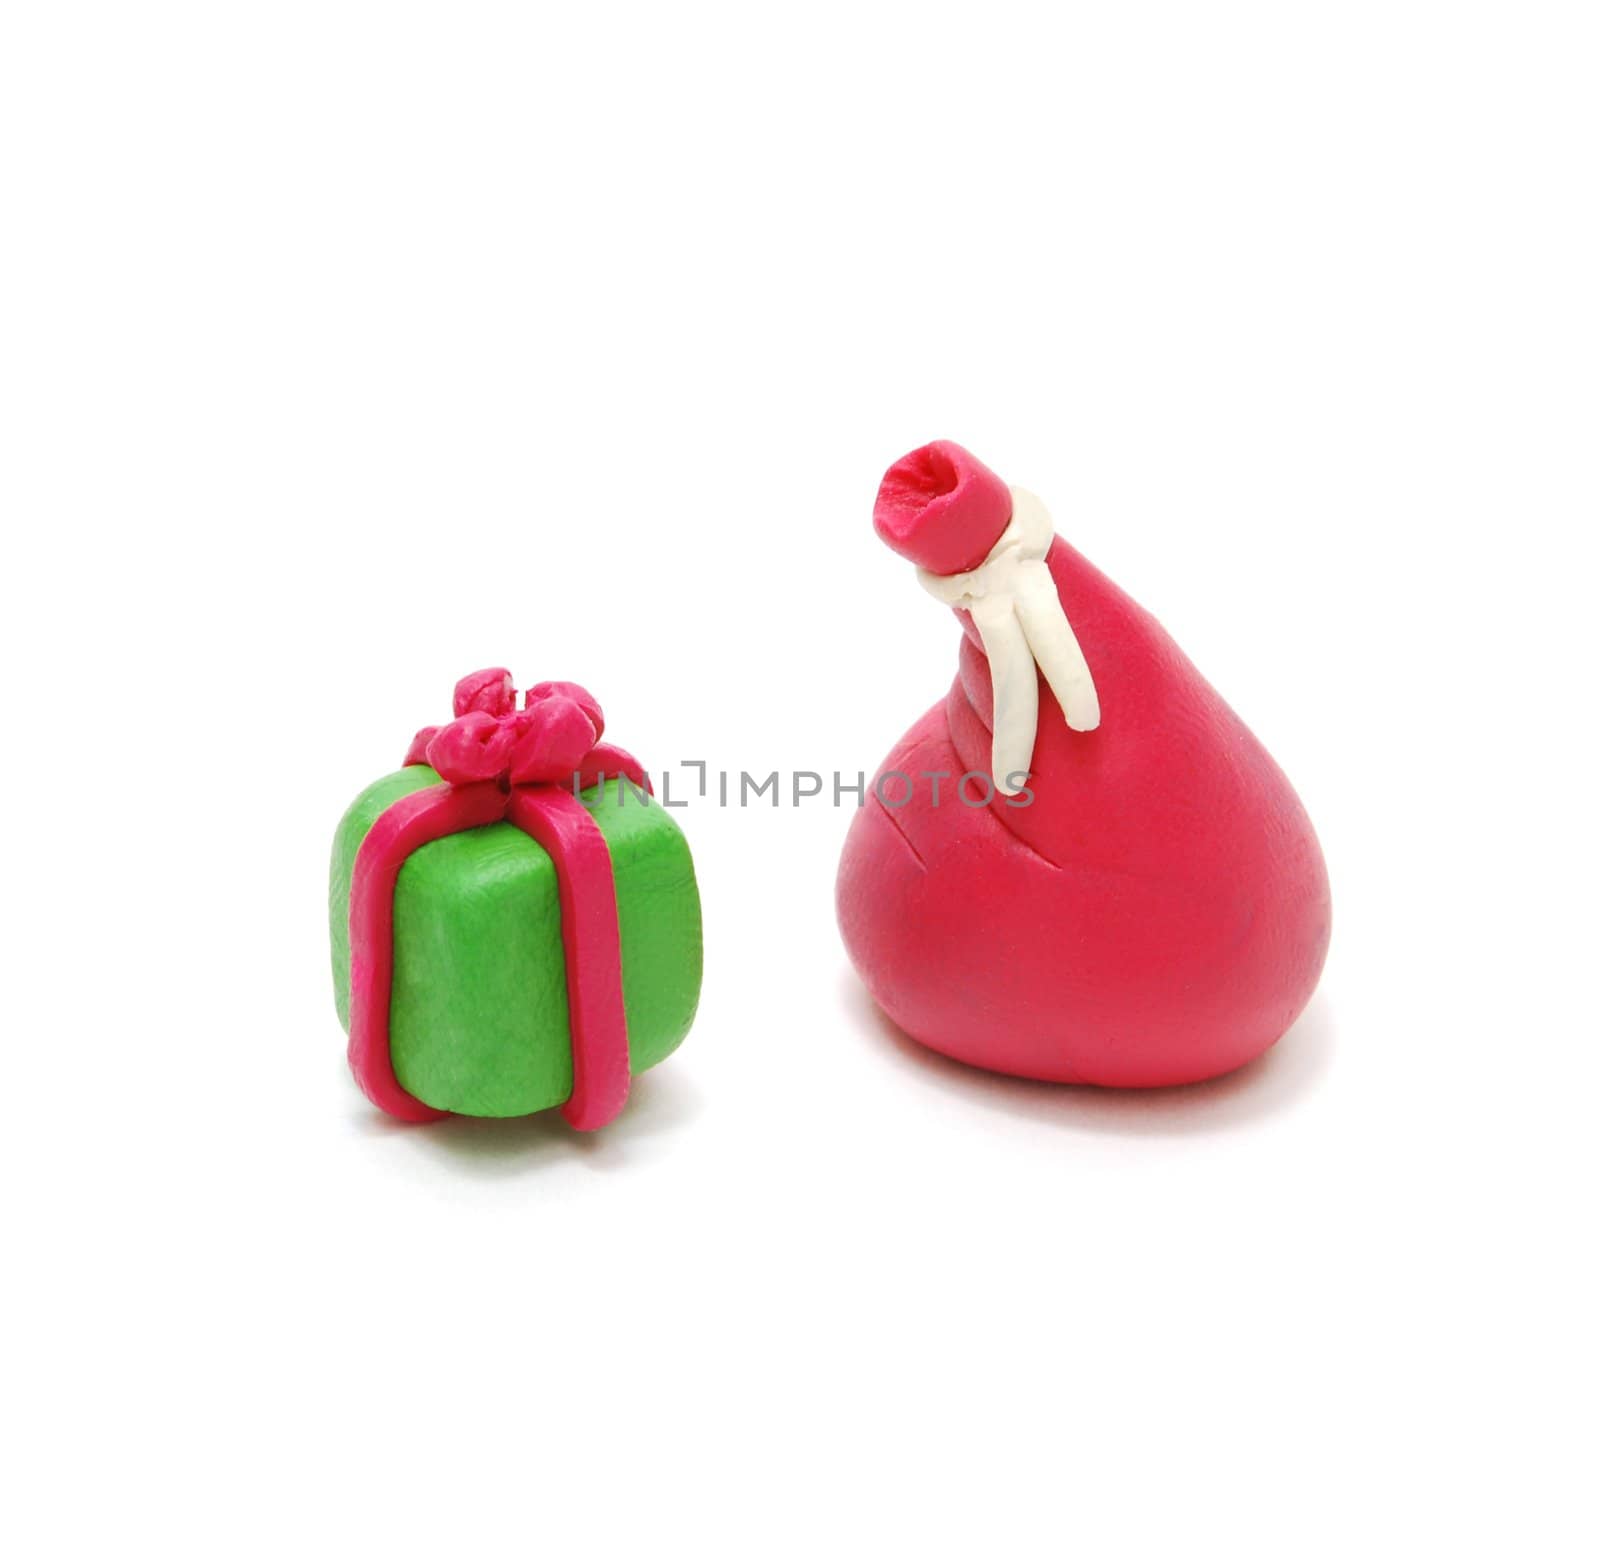 3D Christmas Gift and Red Santa's Sack Made of Plasticine Isolated on White Background